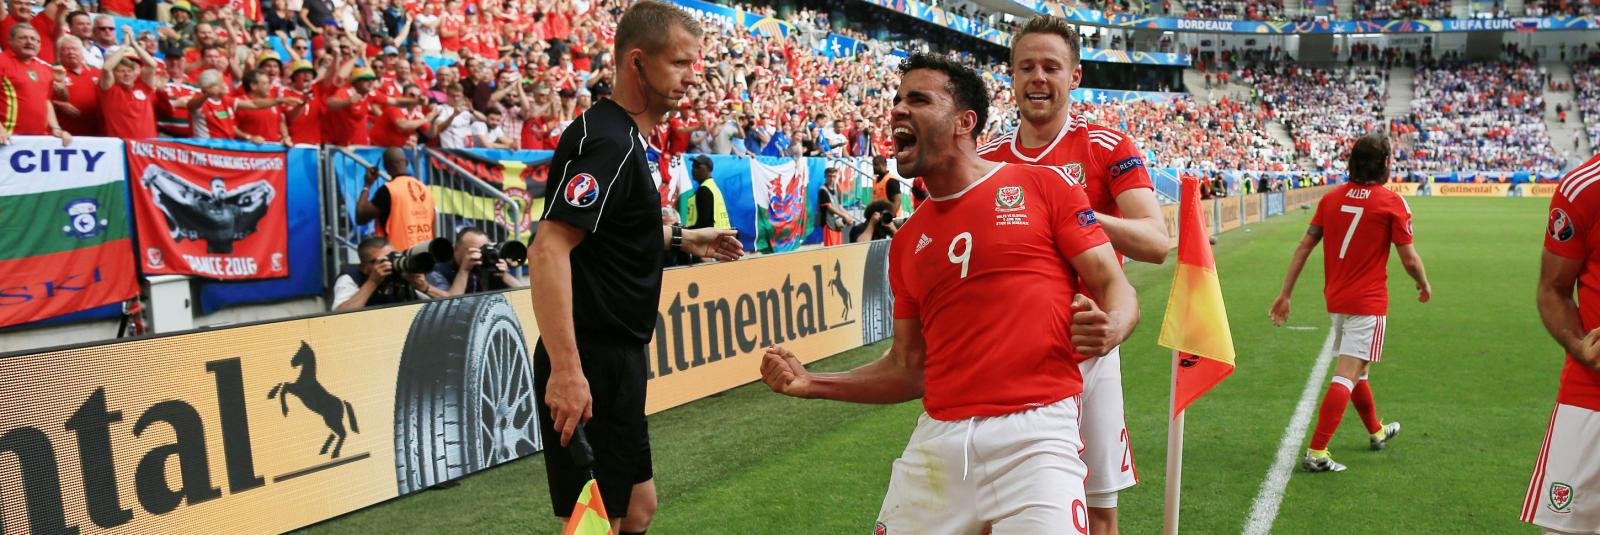 Wales vs Northern Ireland: EURO 2016 Round of 16 Preview & Prediction